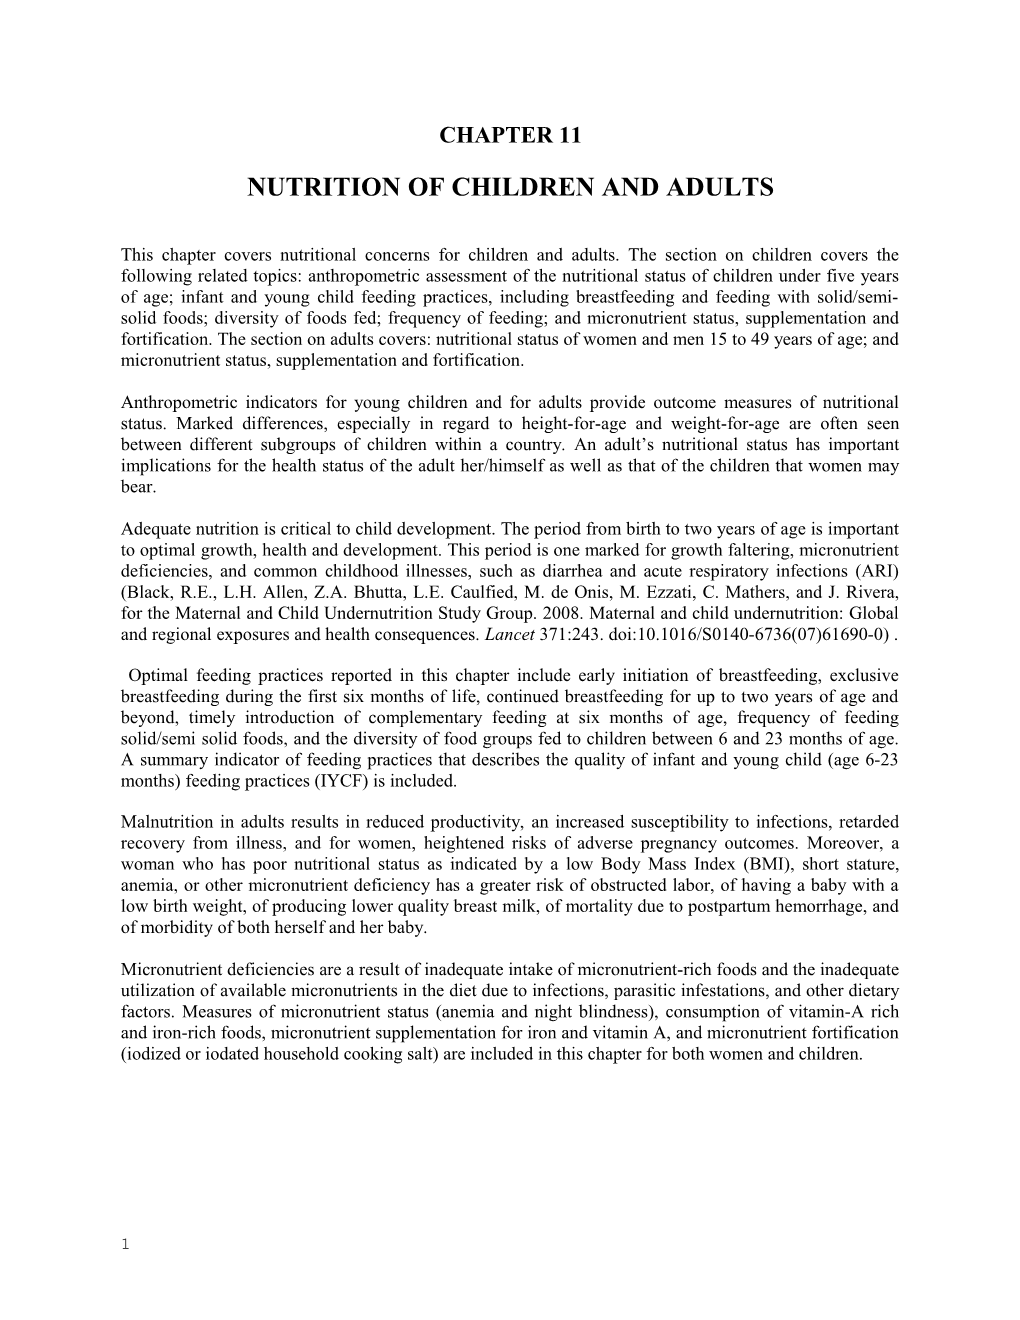 Nutrition of Children and Adults